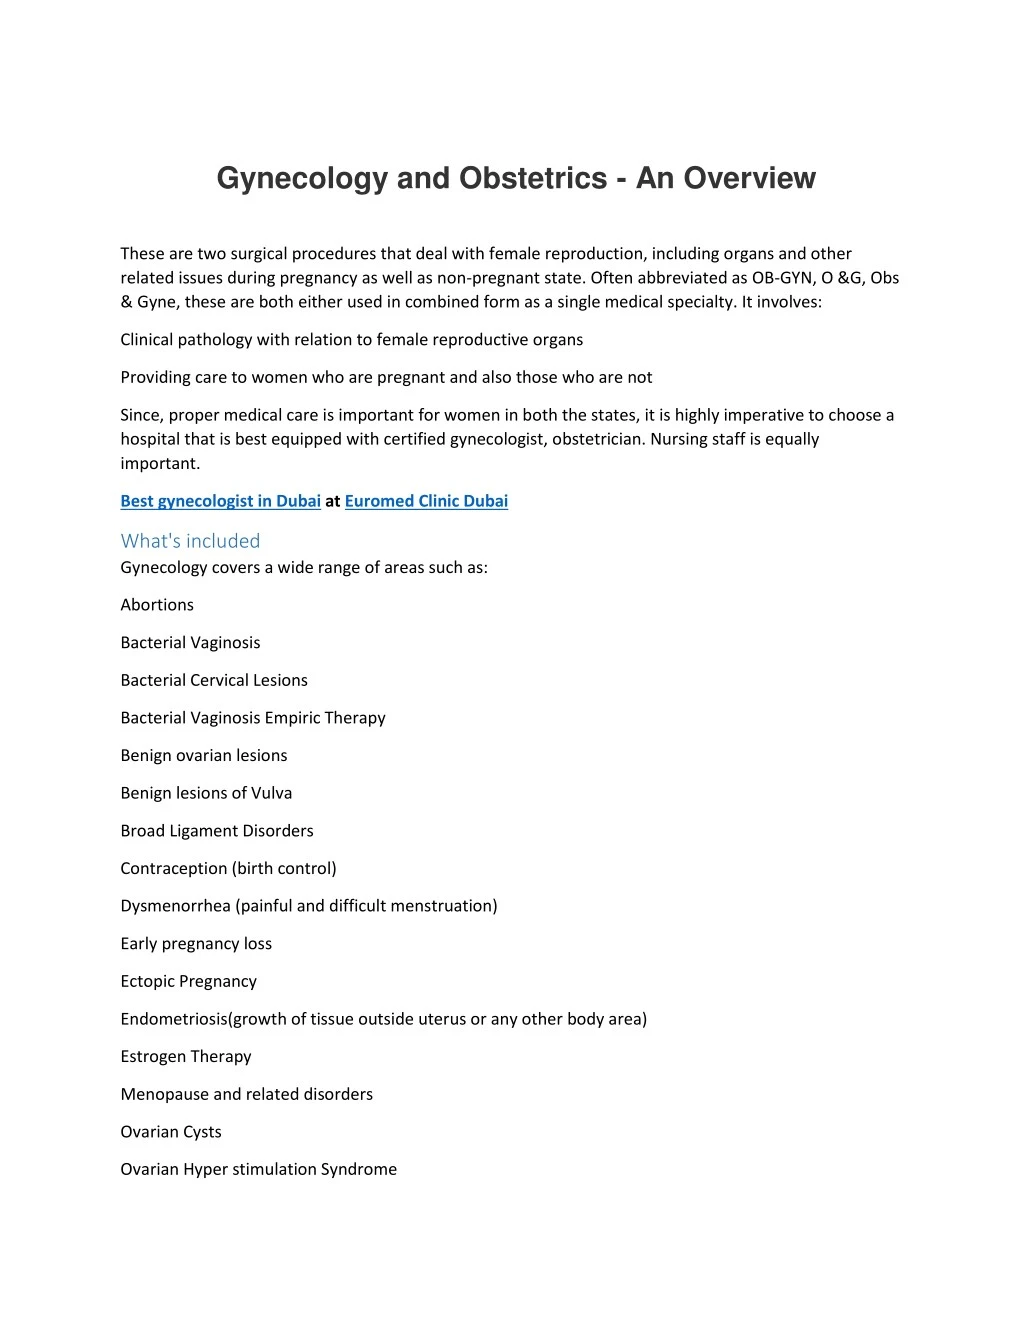 gynecology and obstetrics an overview